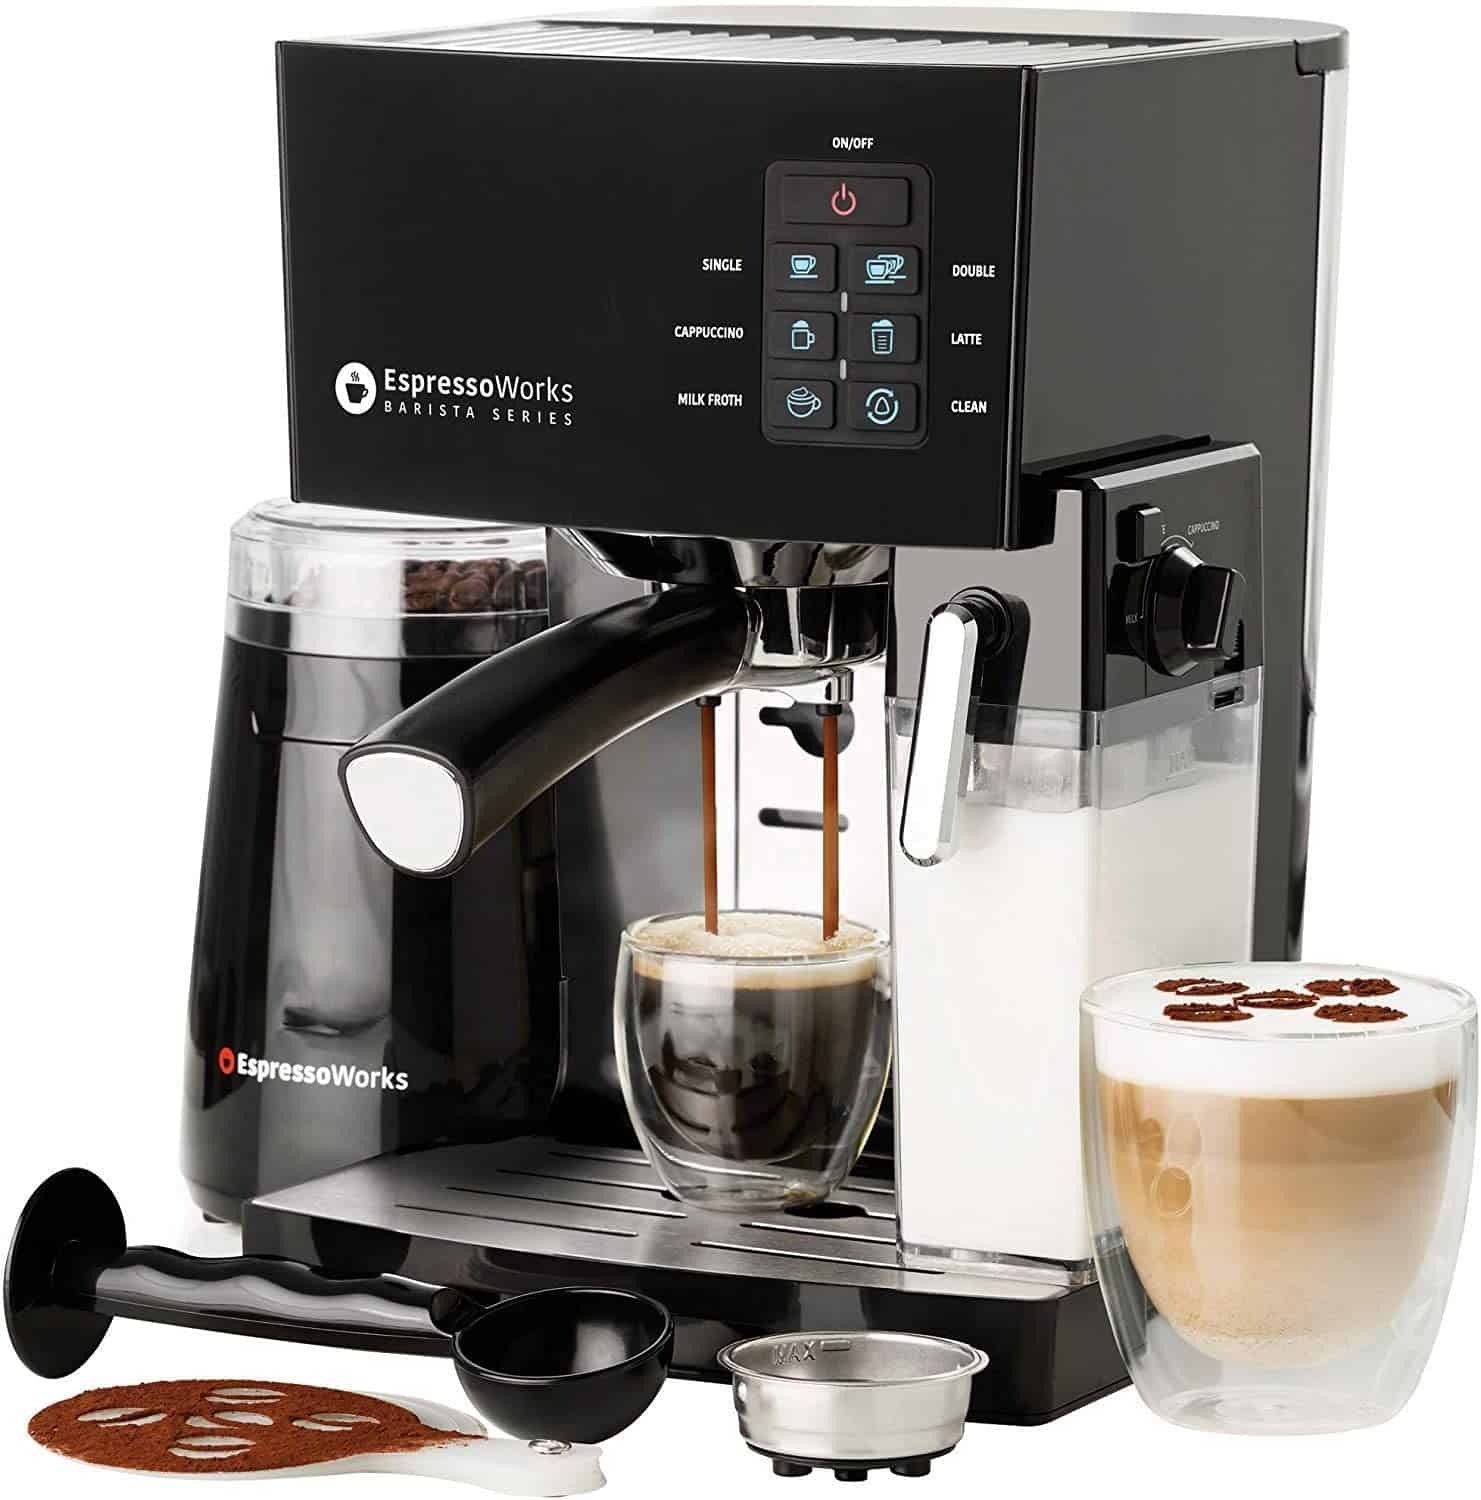 The 5 Best Latte Machines For Home Use (2022 Data) The Coffee Buzz